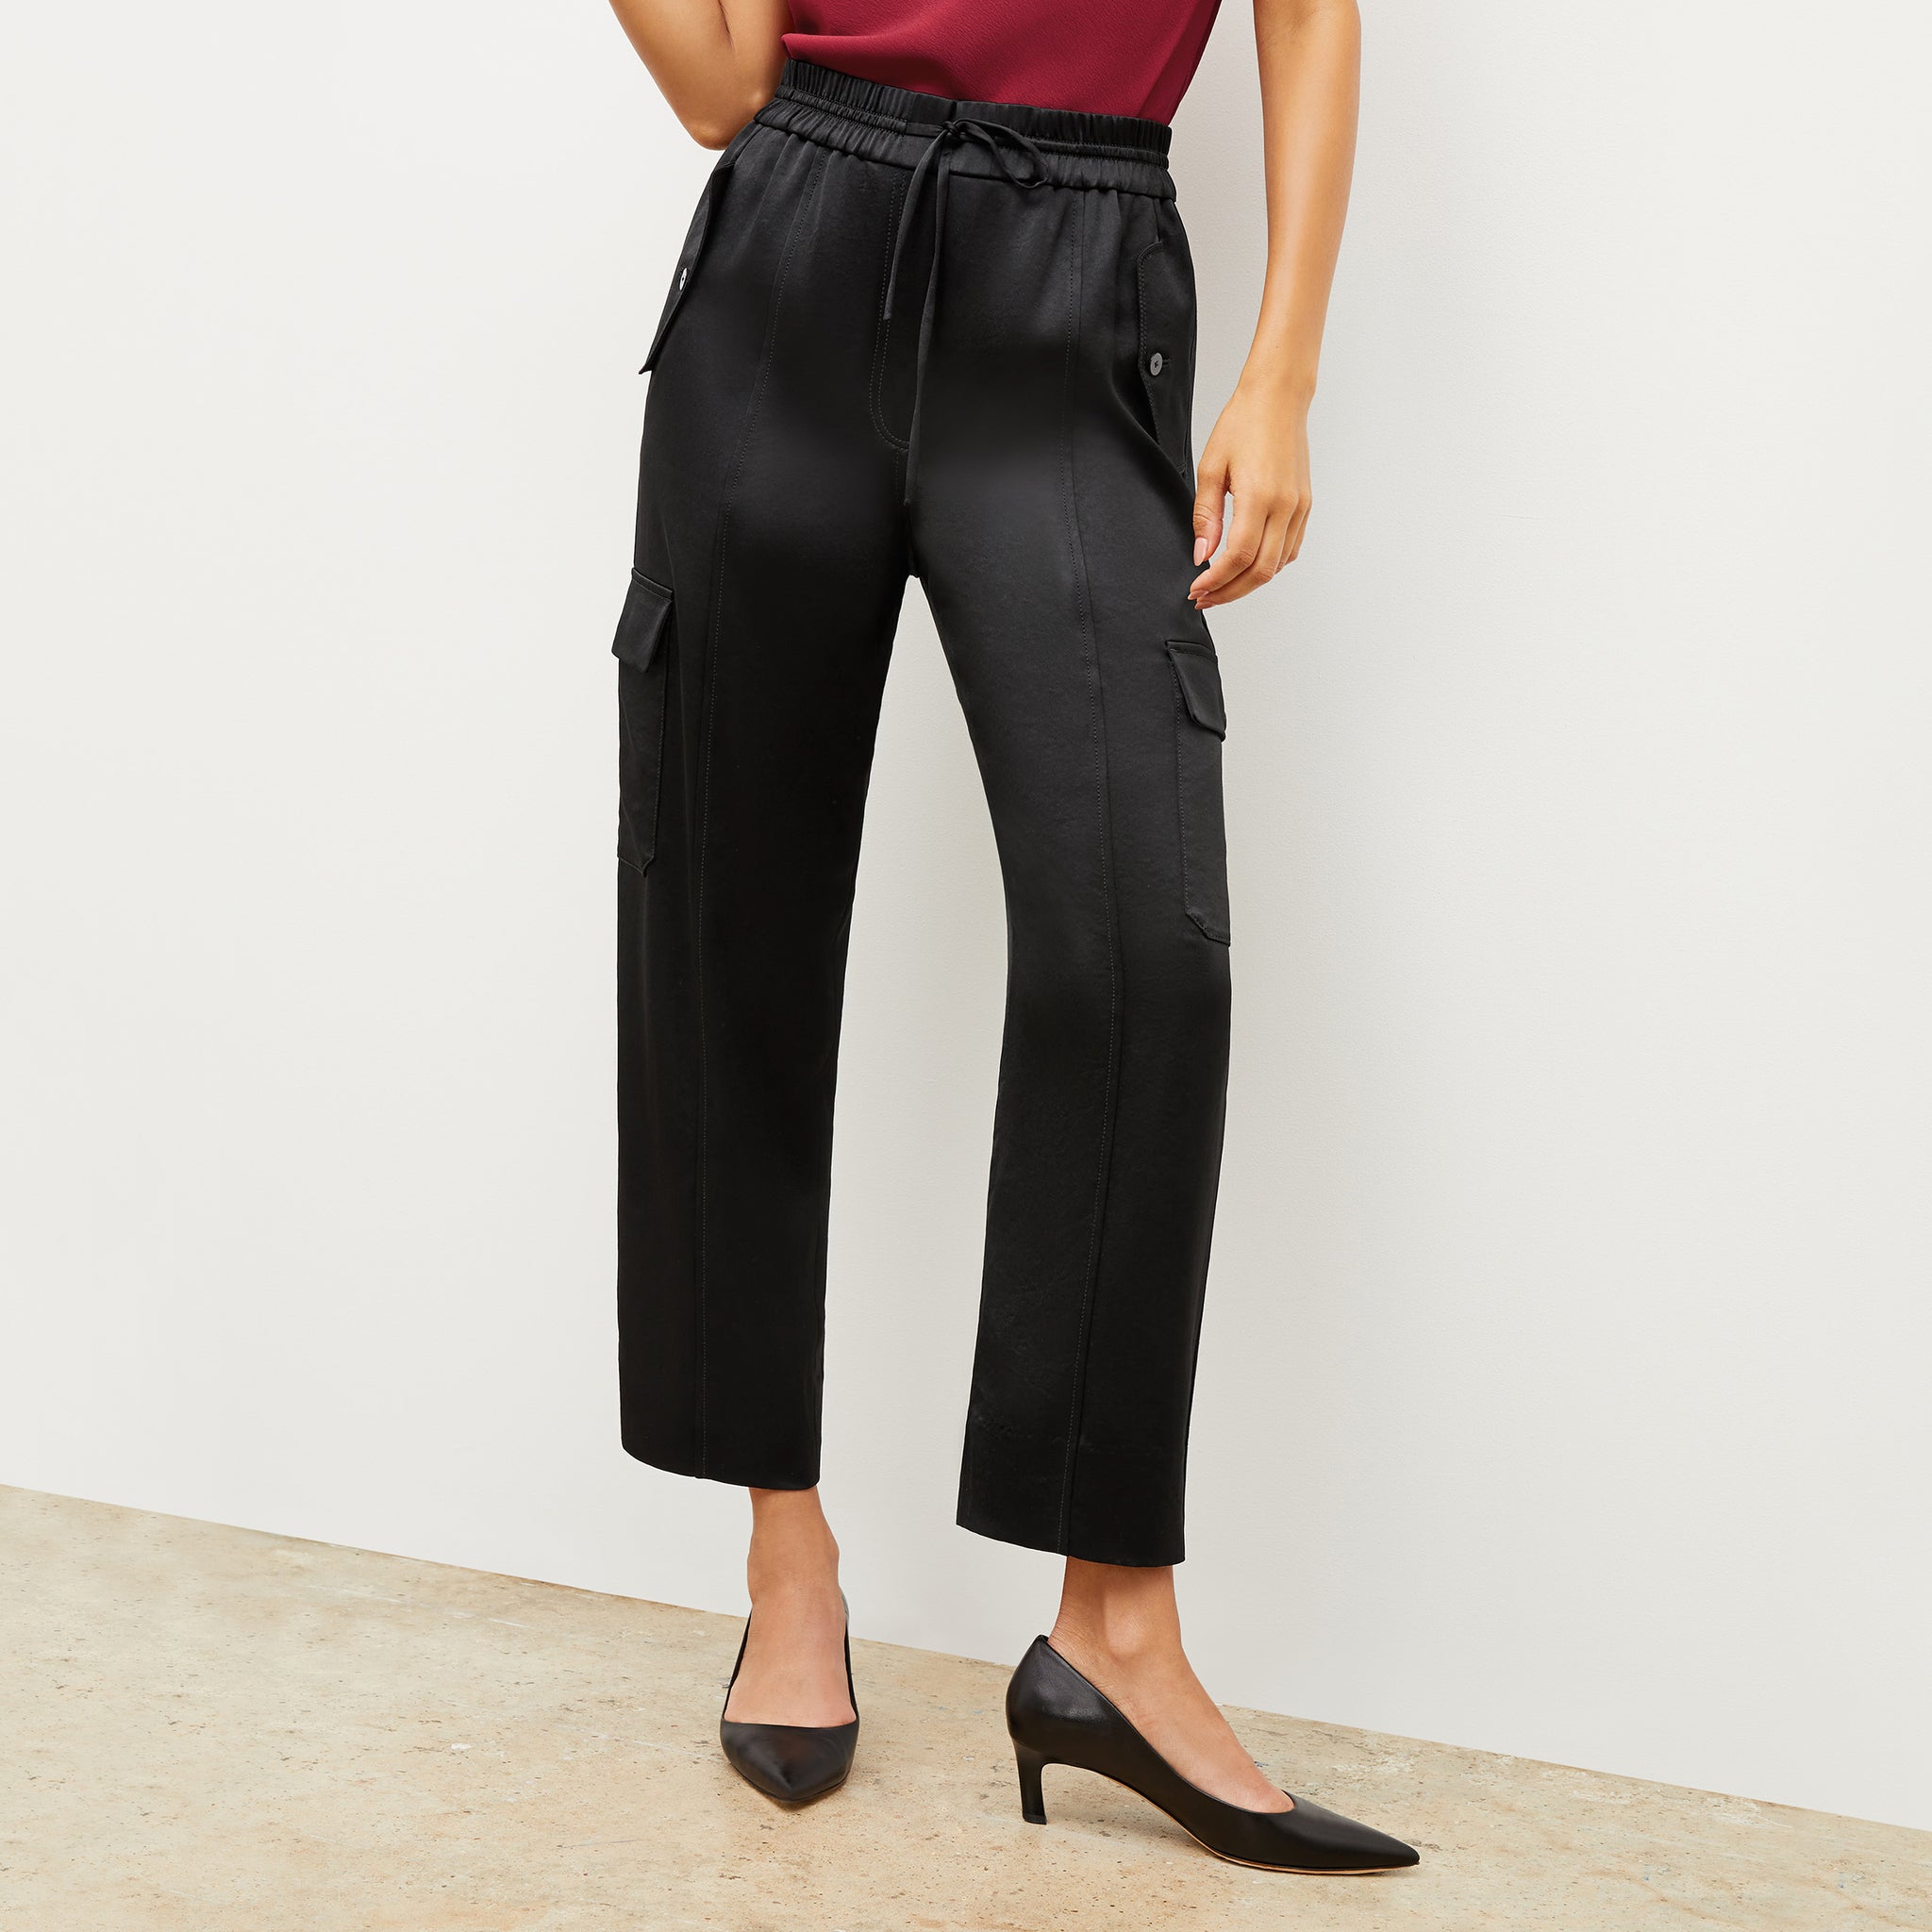 Image of a woman wearing the Gianna Pant in Black